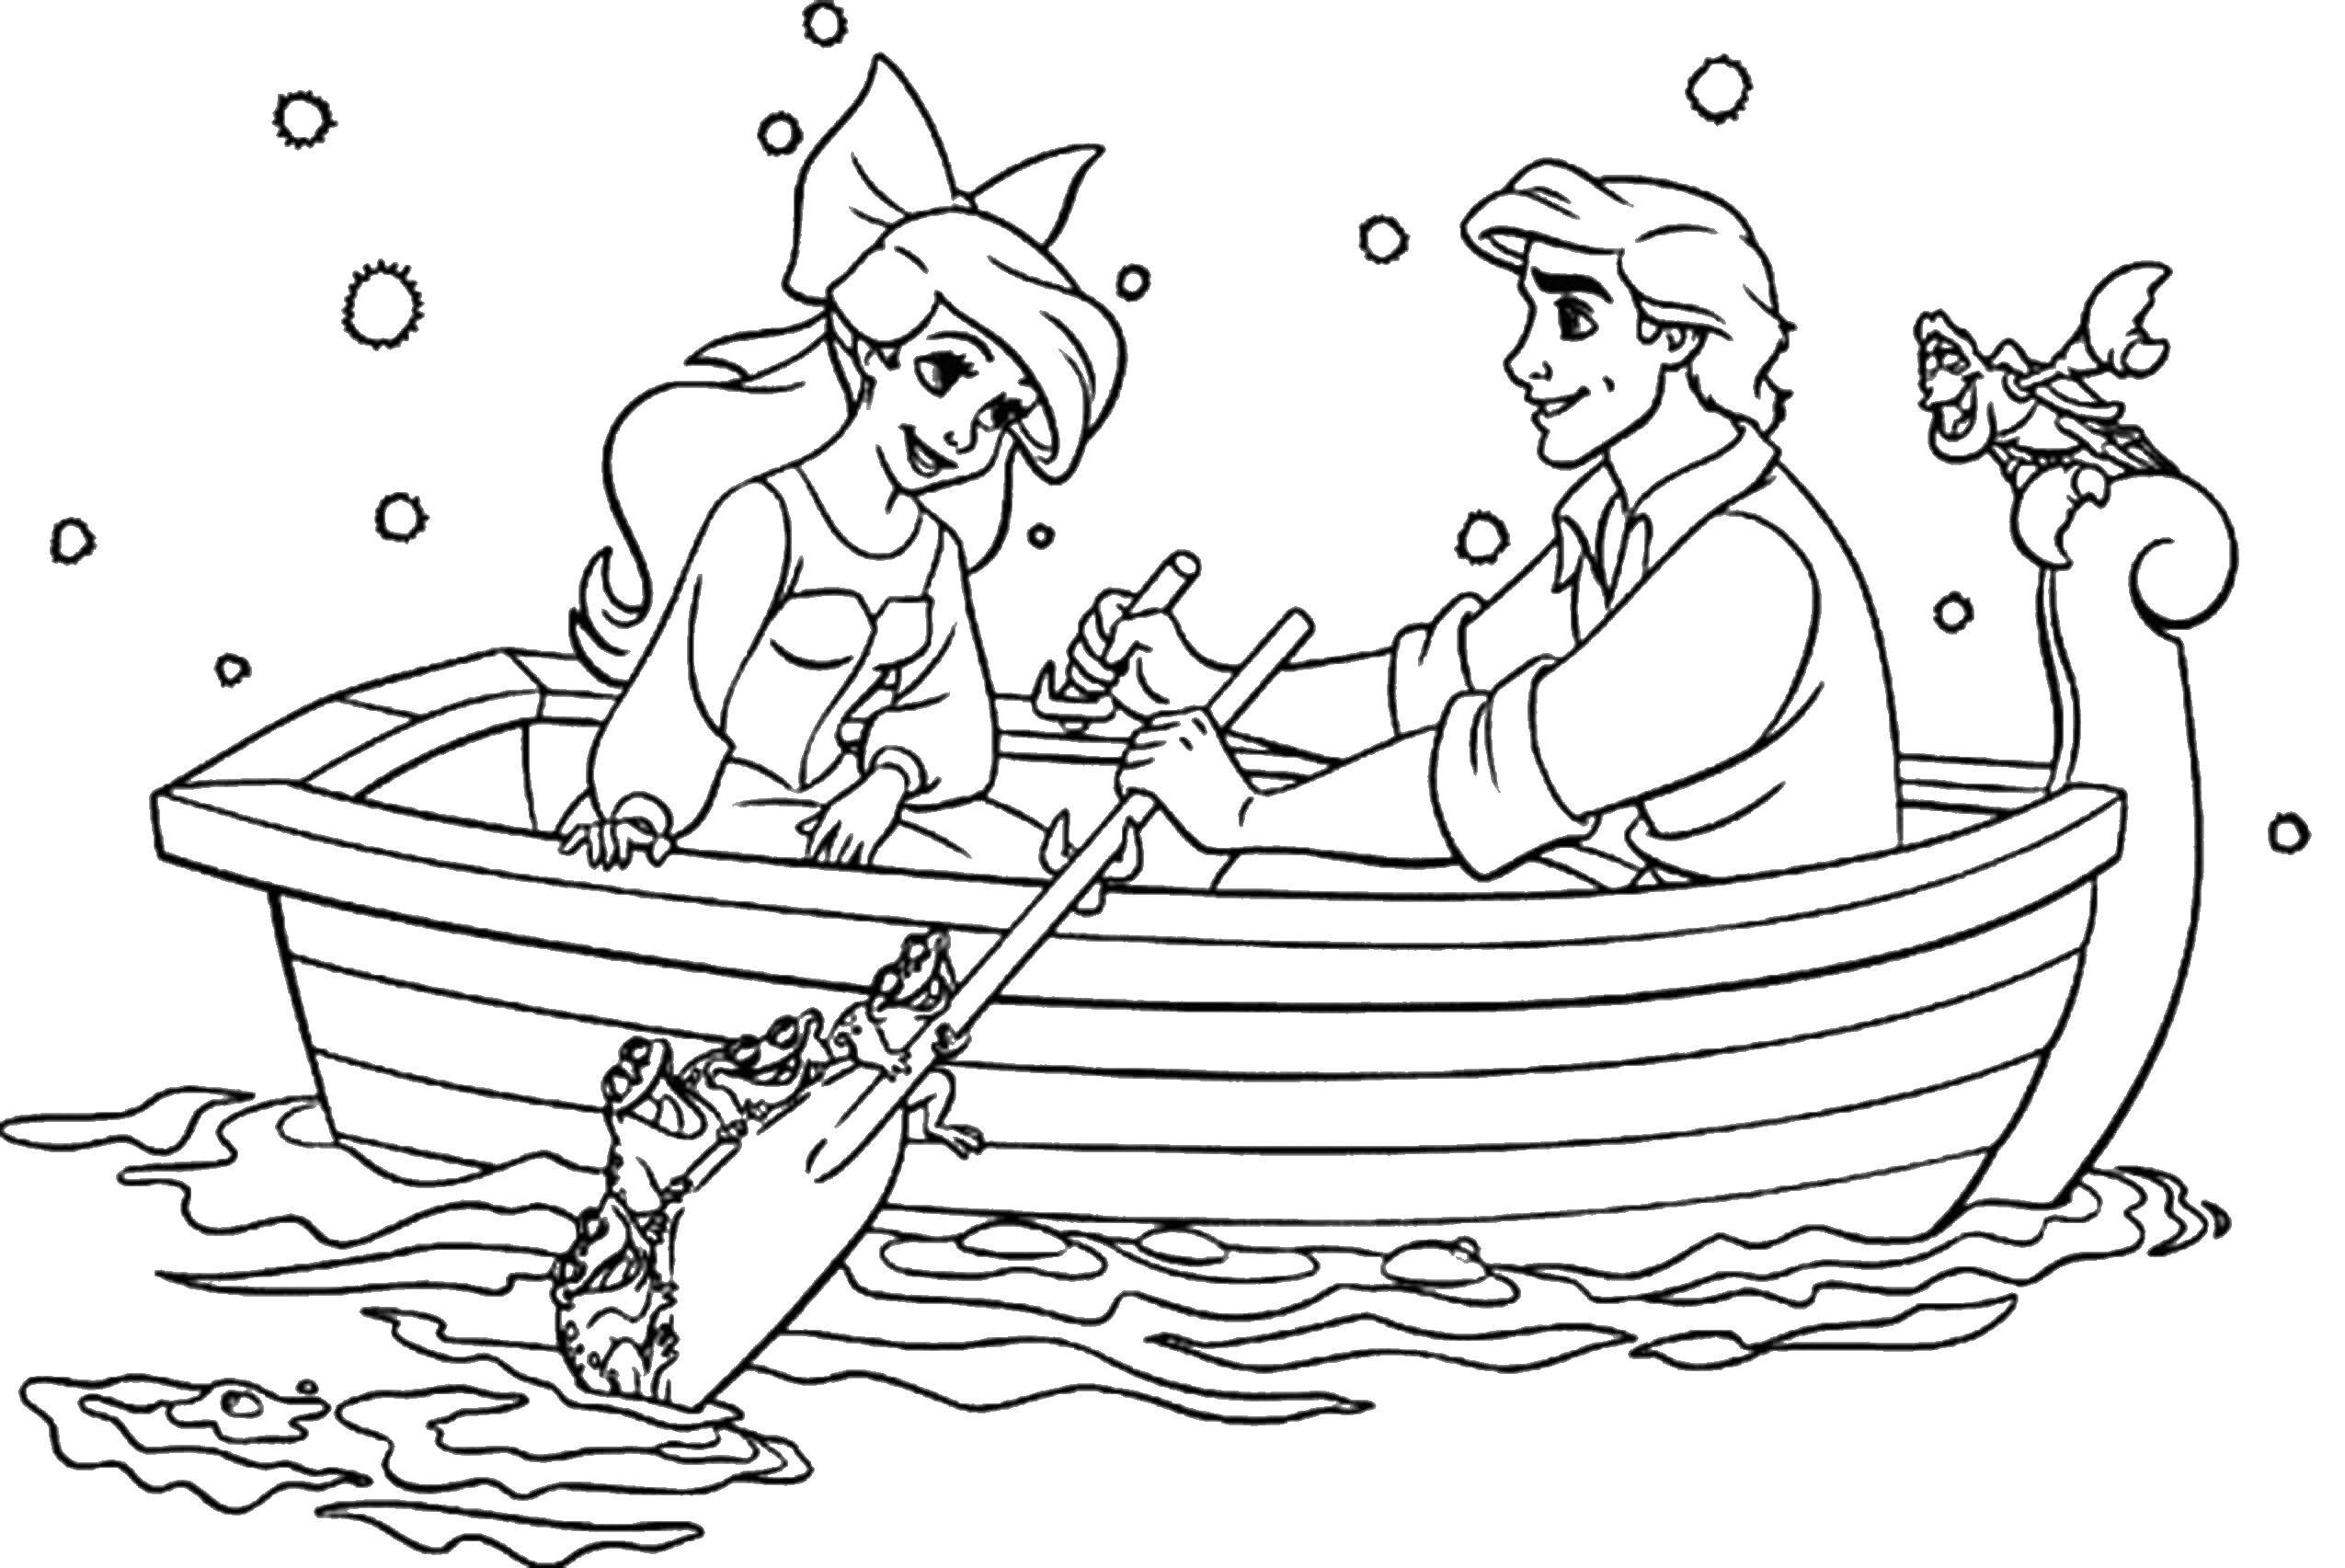 Coloring Ariel with her beloved. Category the little mermaid Ariel. Tags:  Disney, the little mermaid, Ariel.